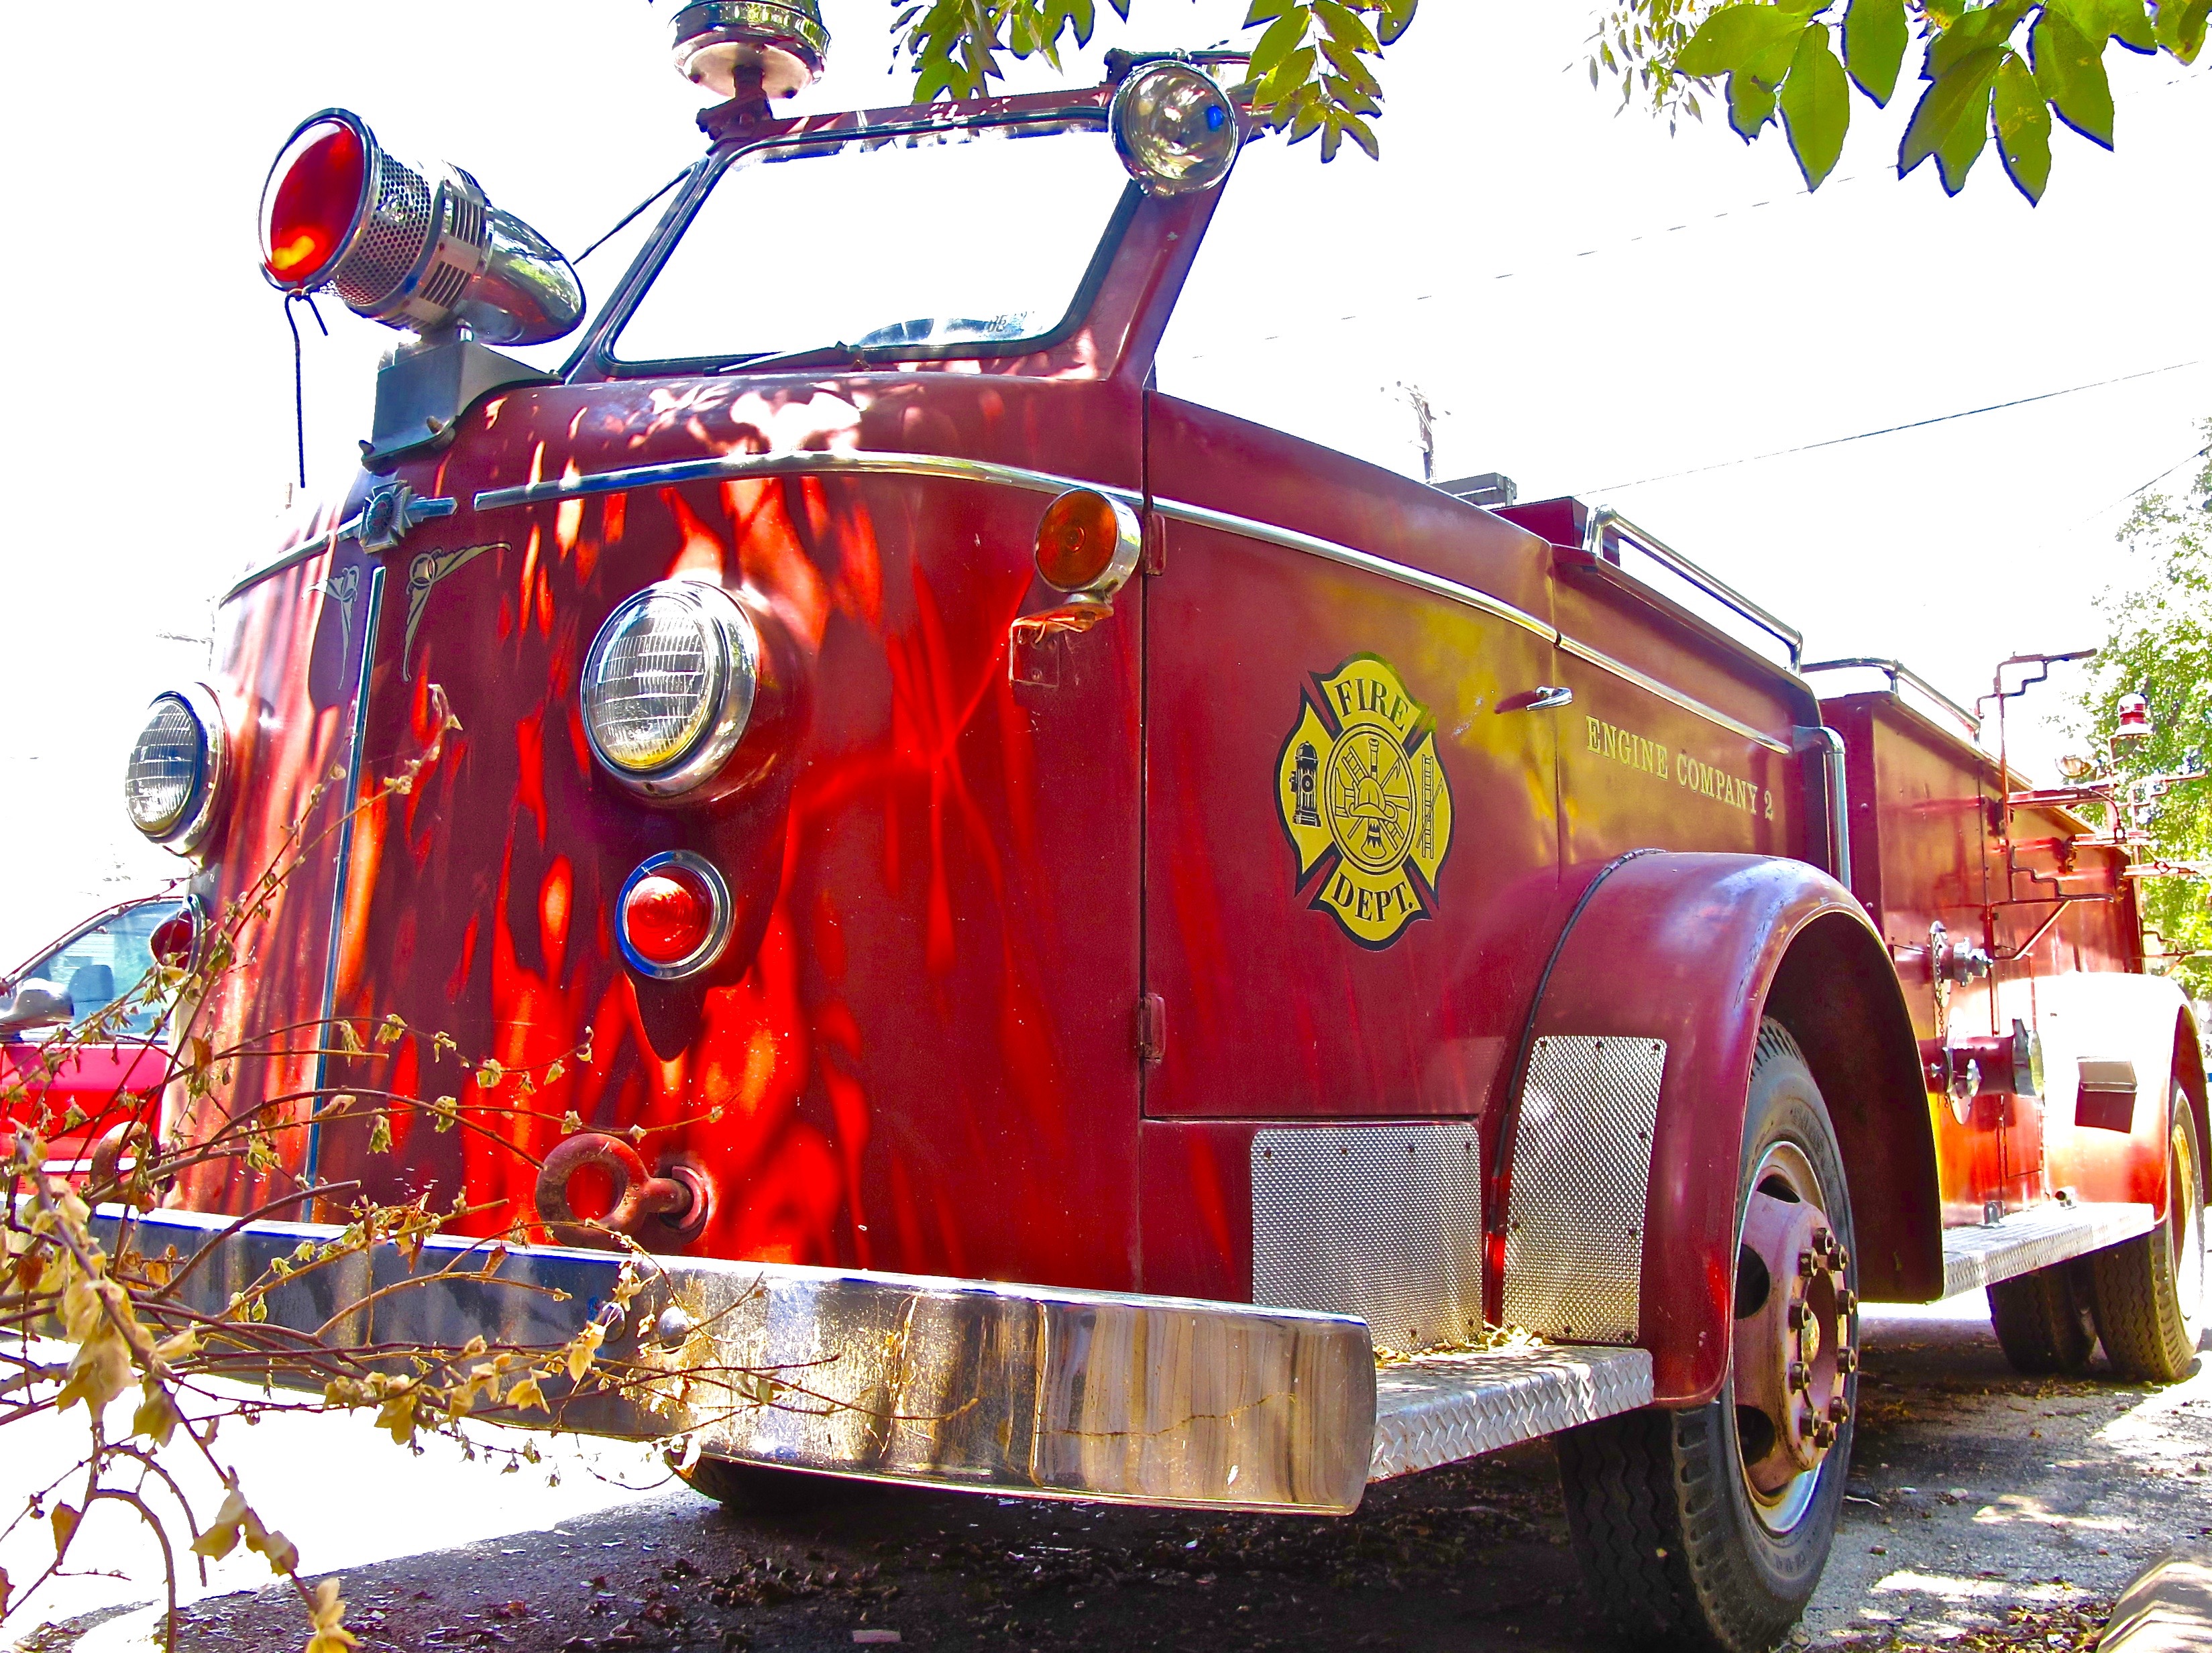 American LaFrance Type 700 Fire Engine front view